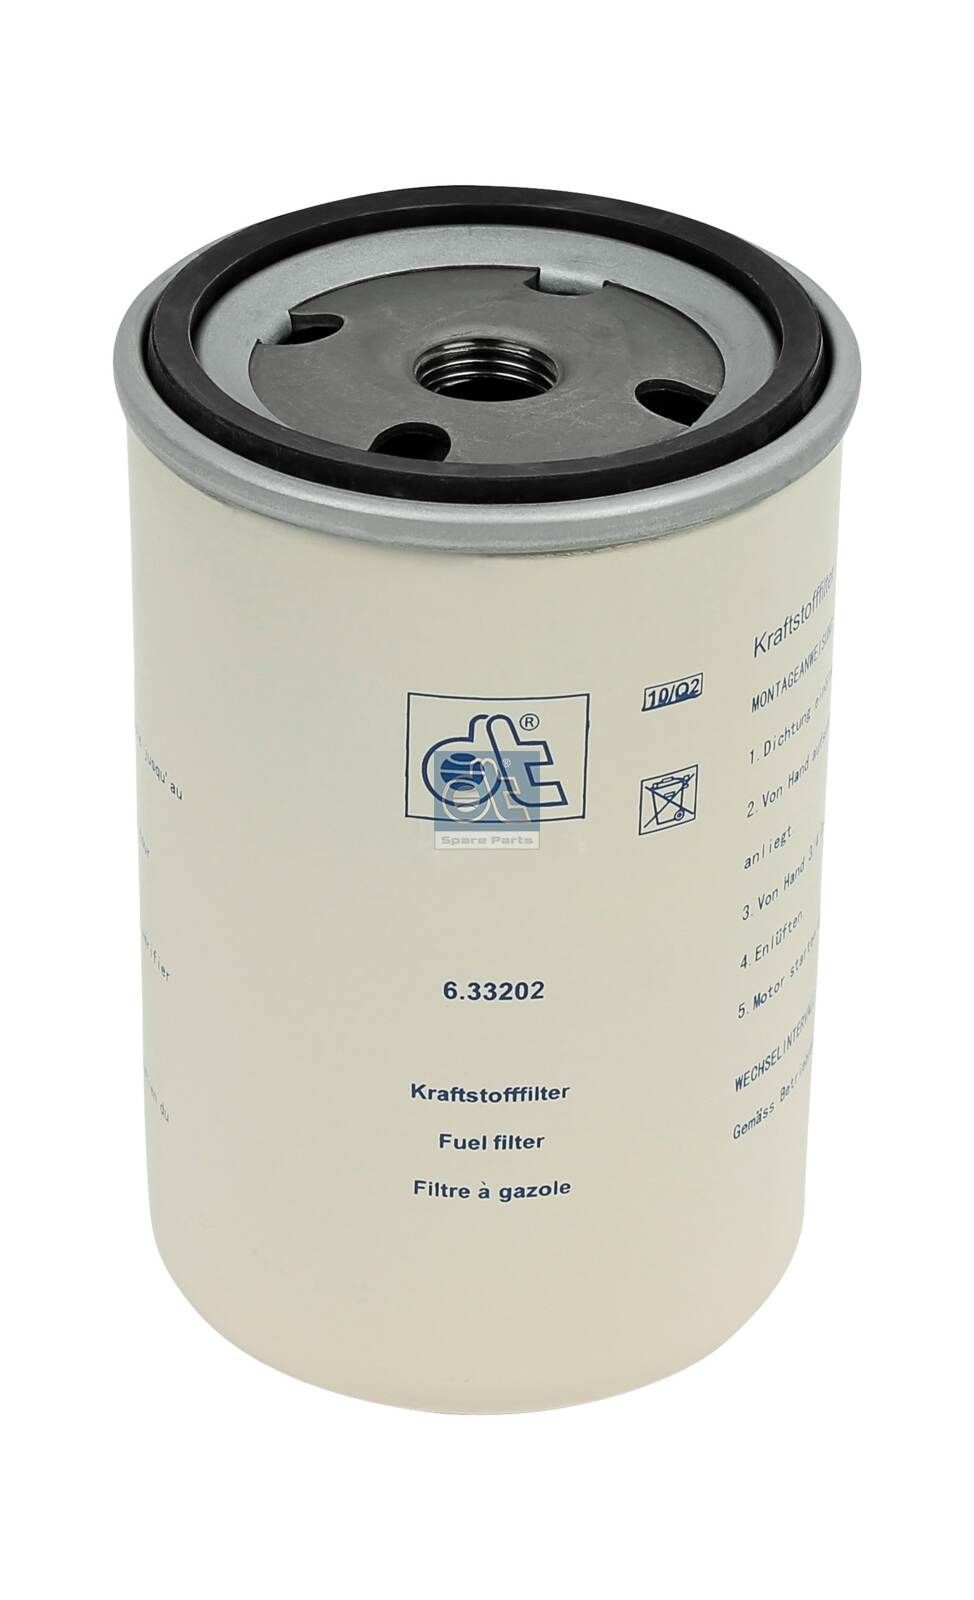 WK 727 DT Spare Parts 6.33202 Fuel filter 5000790570